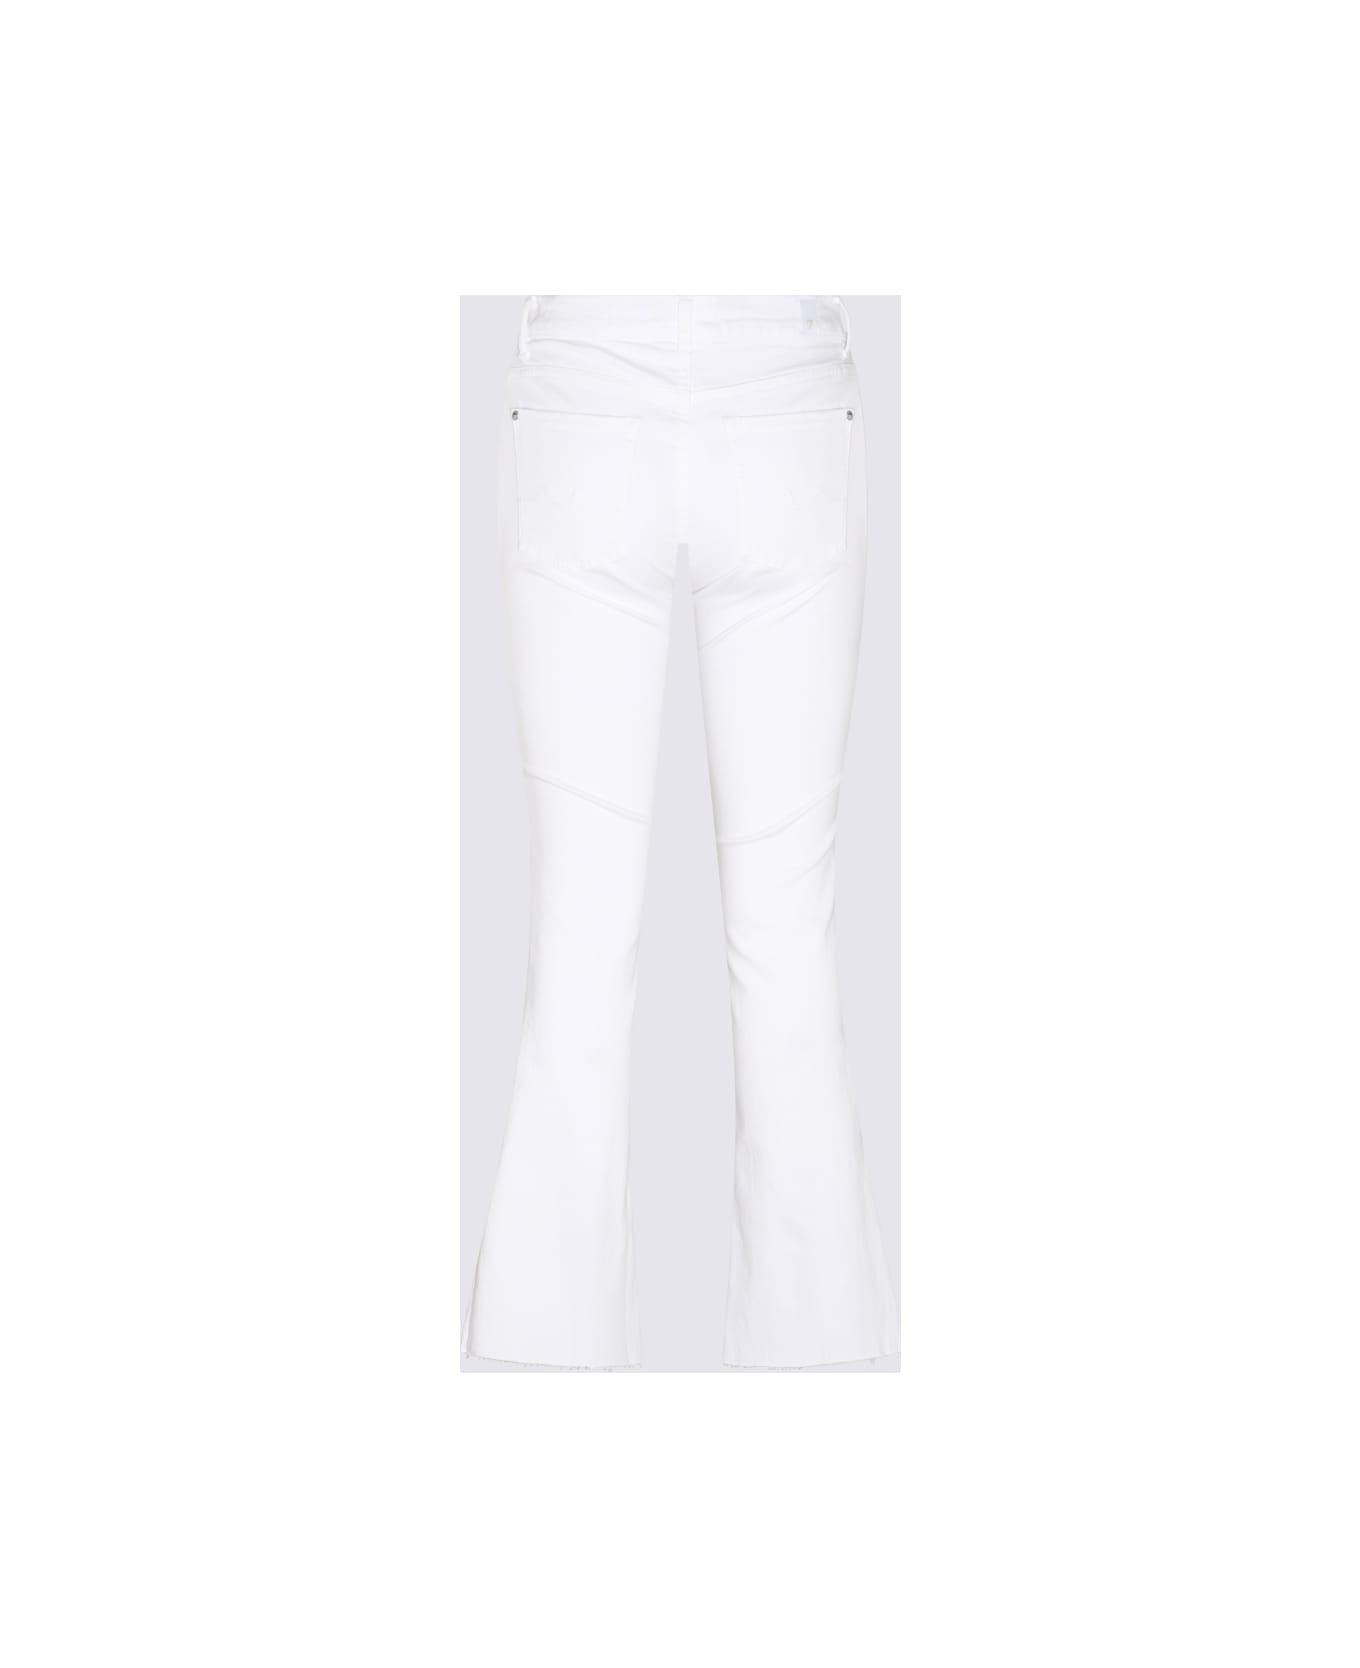 7 For All Mankind White Cotton Blend Jeans - White